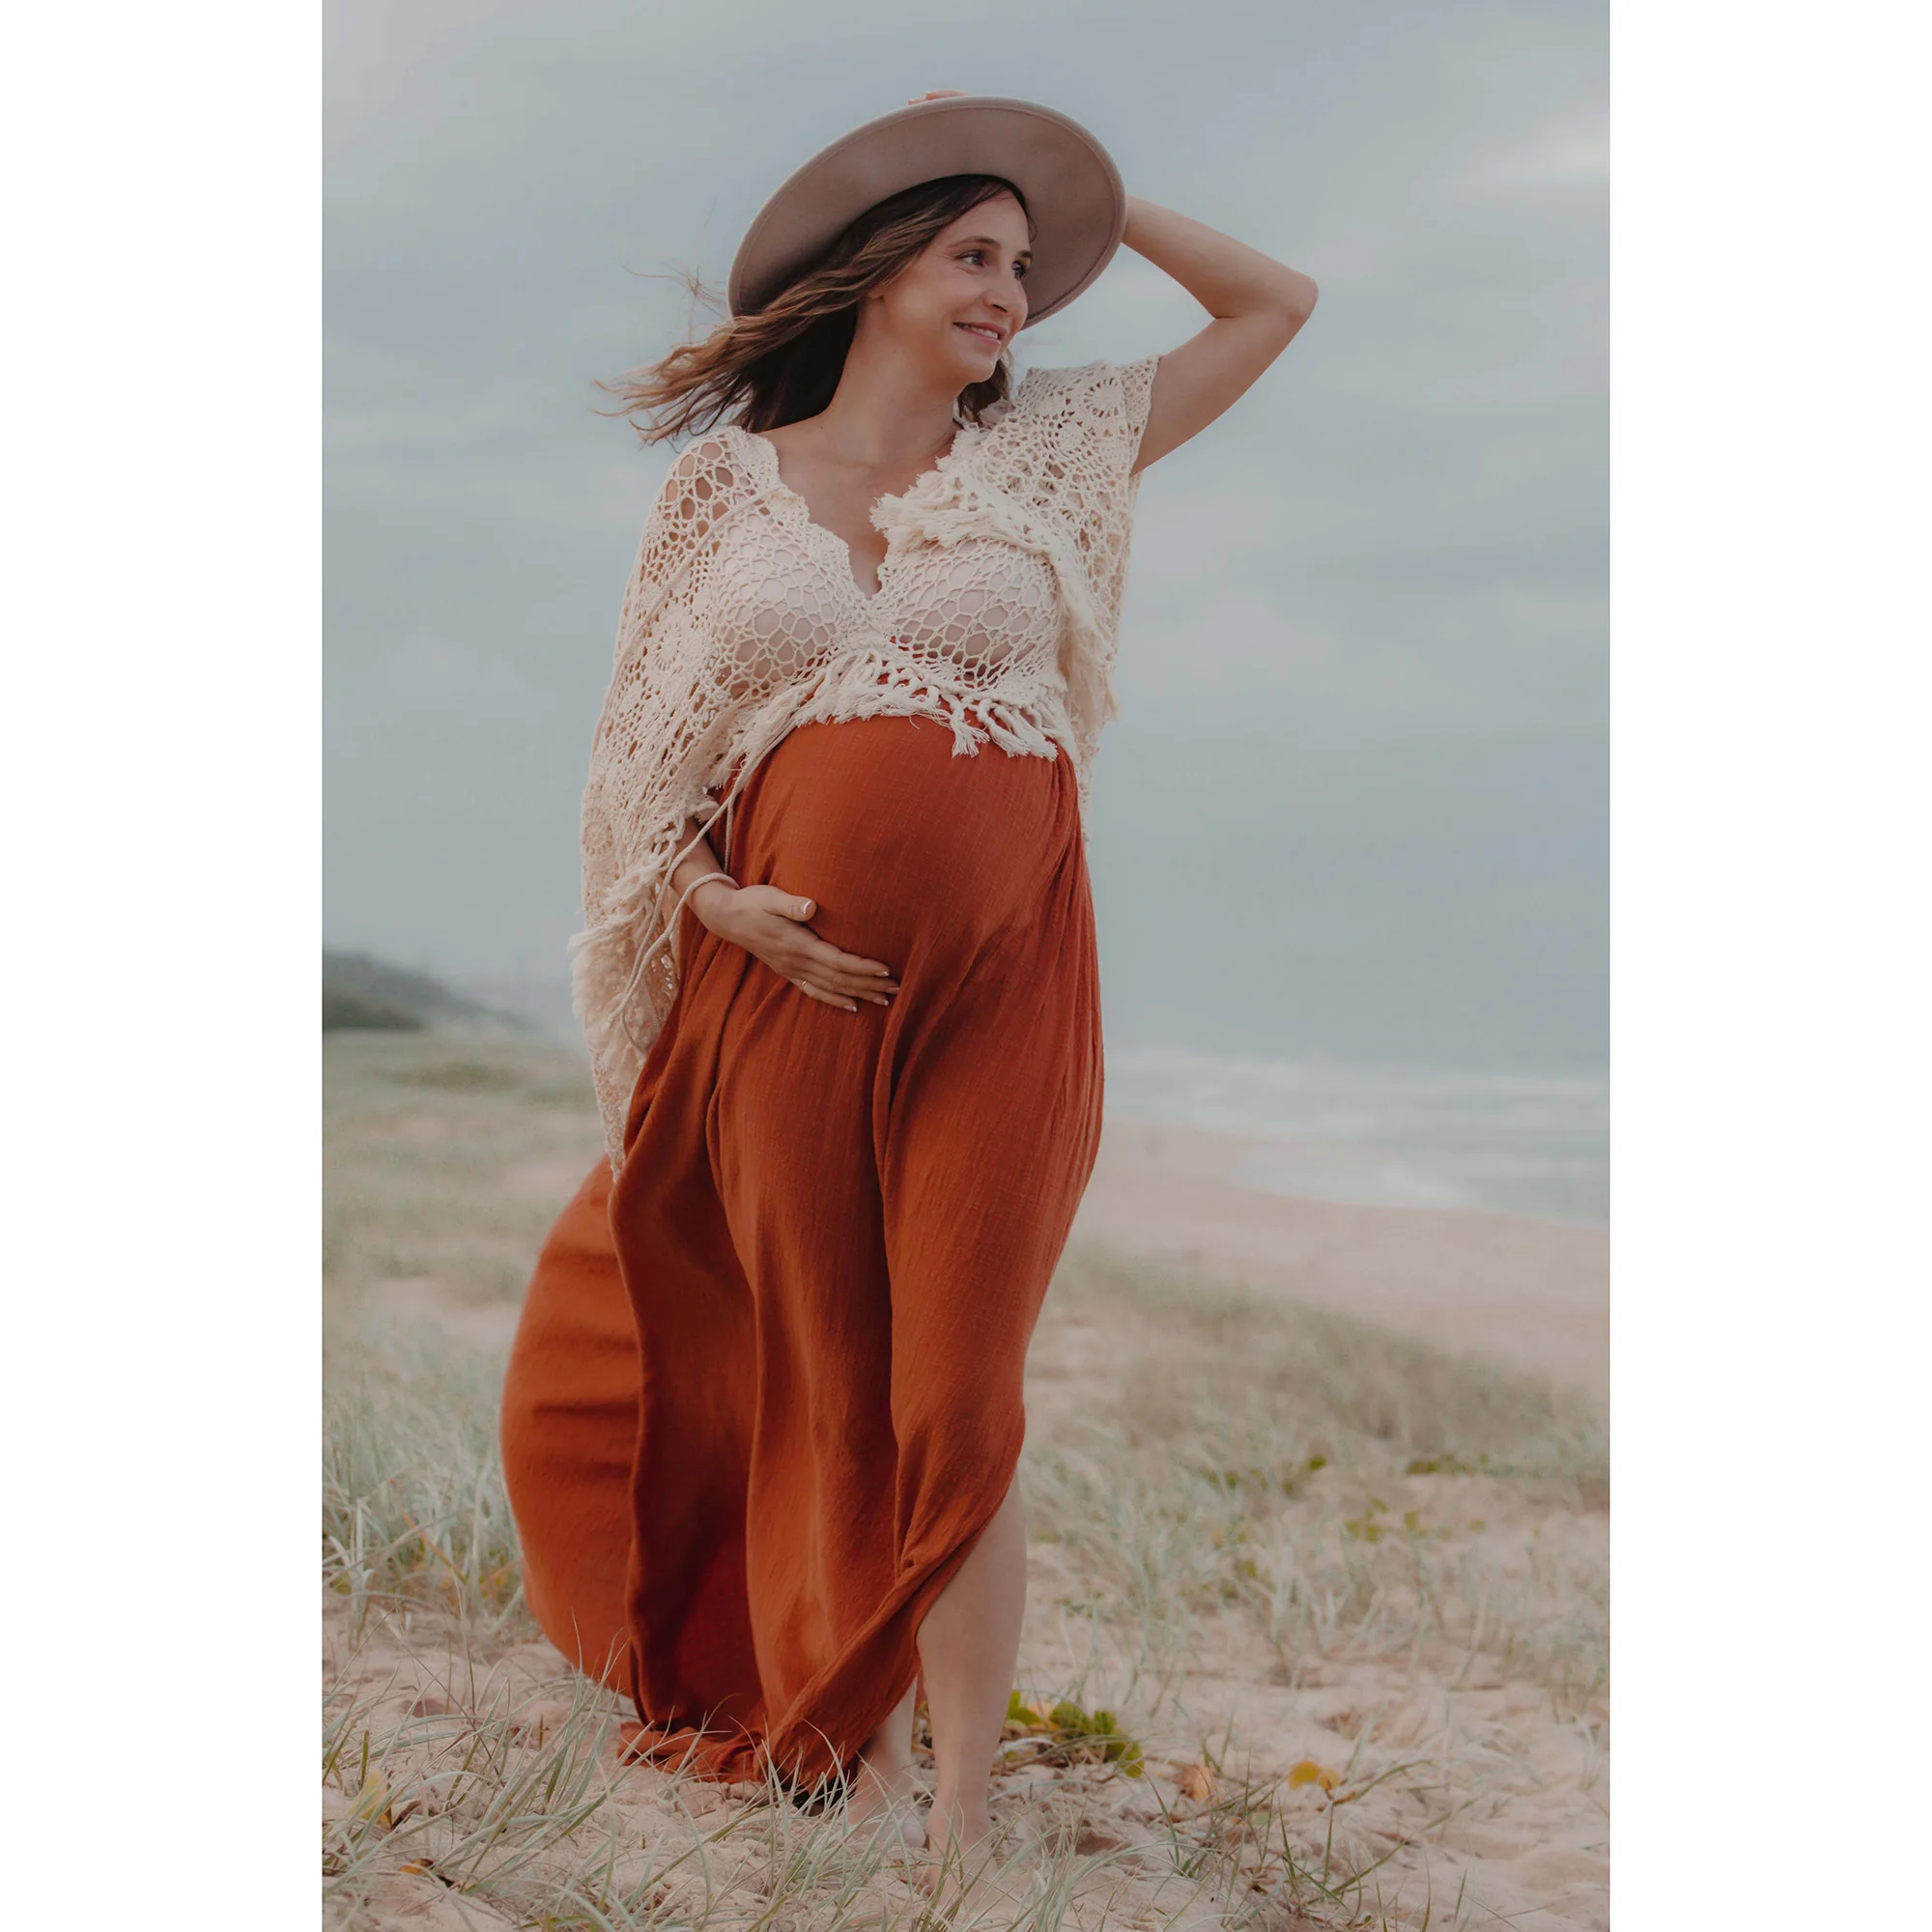 Vintage Boho Emboridery Cotton Photo Shoot Pregnant Robe Maternity Dress Evening Party Costume Women Photography Accessories enlarge